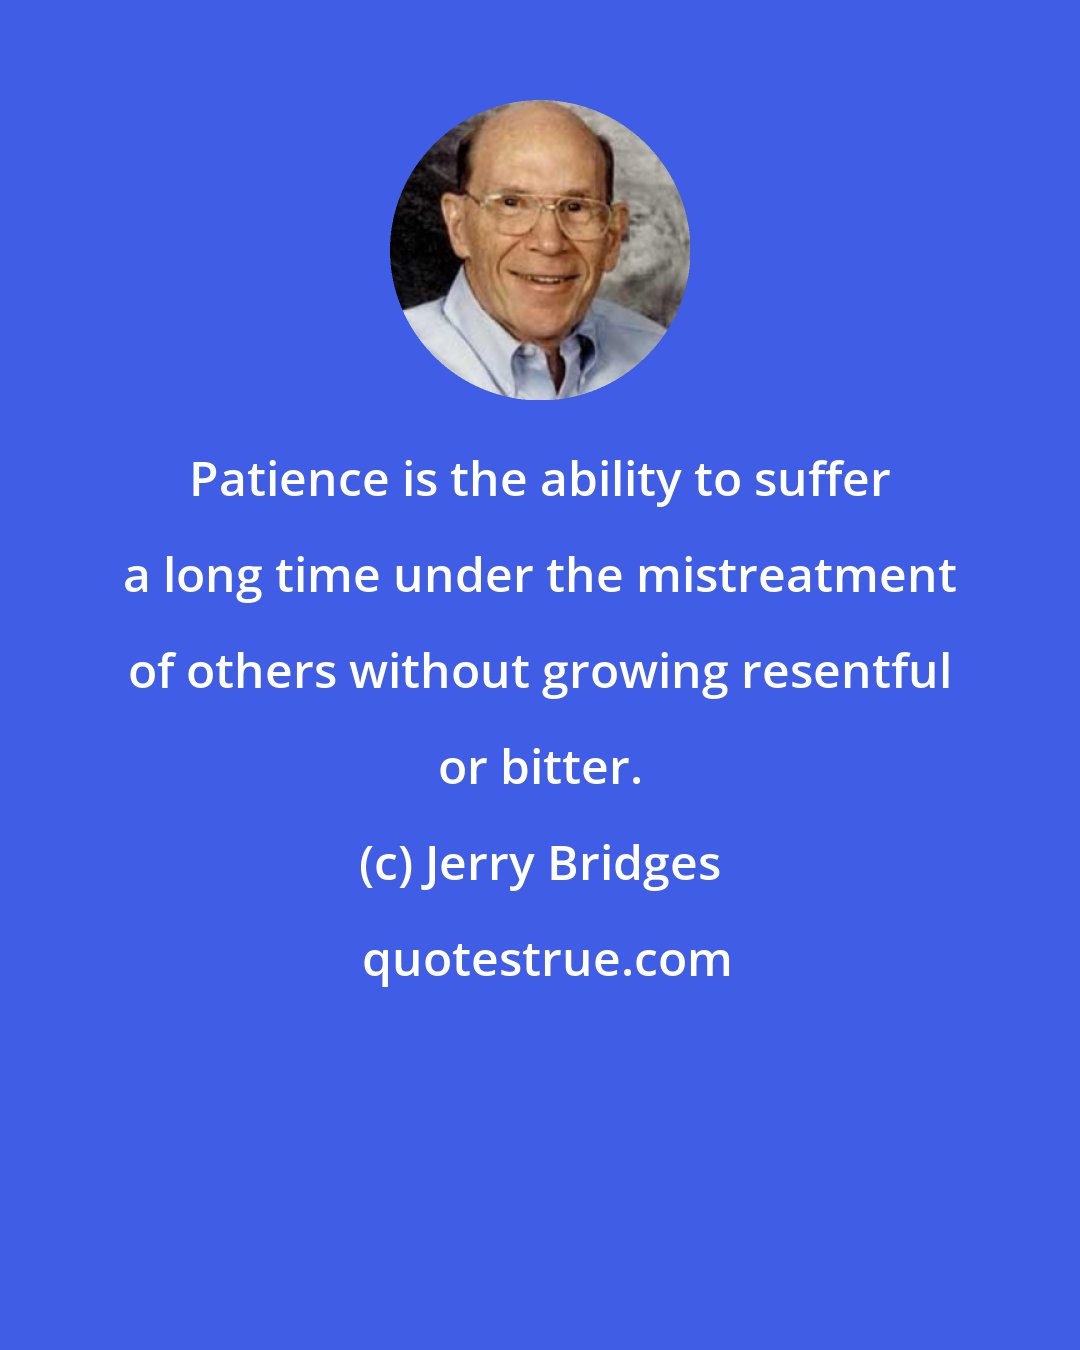 Jerry Bridges: Patience is the ability to suffer a long time under the mistreatment of others without growing resentful or bitter.